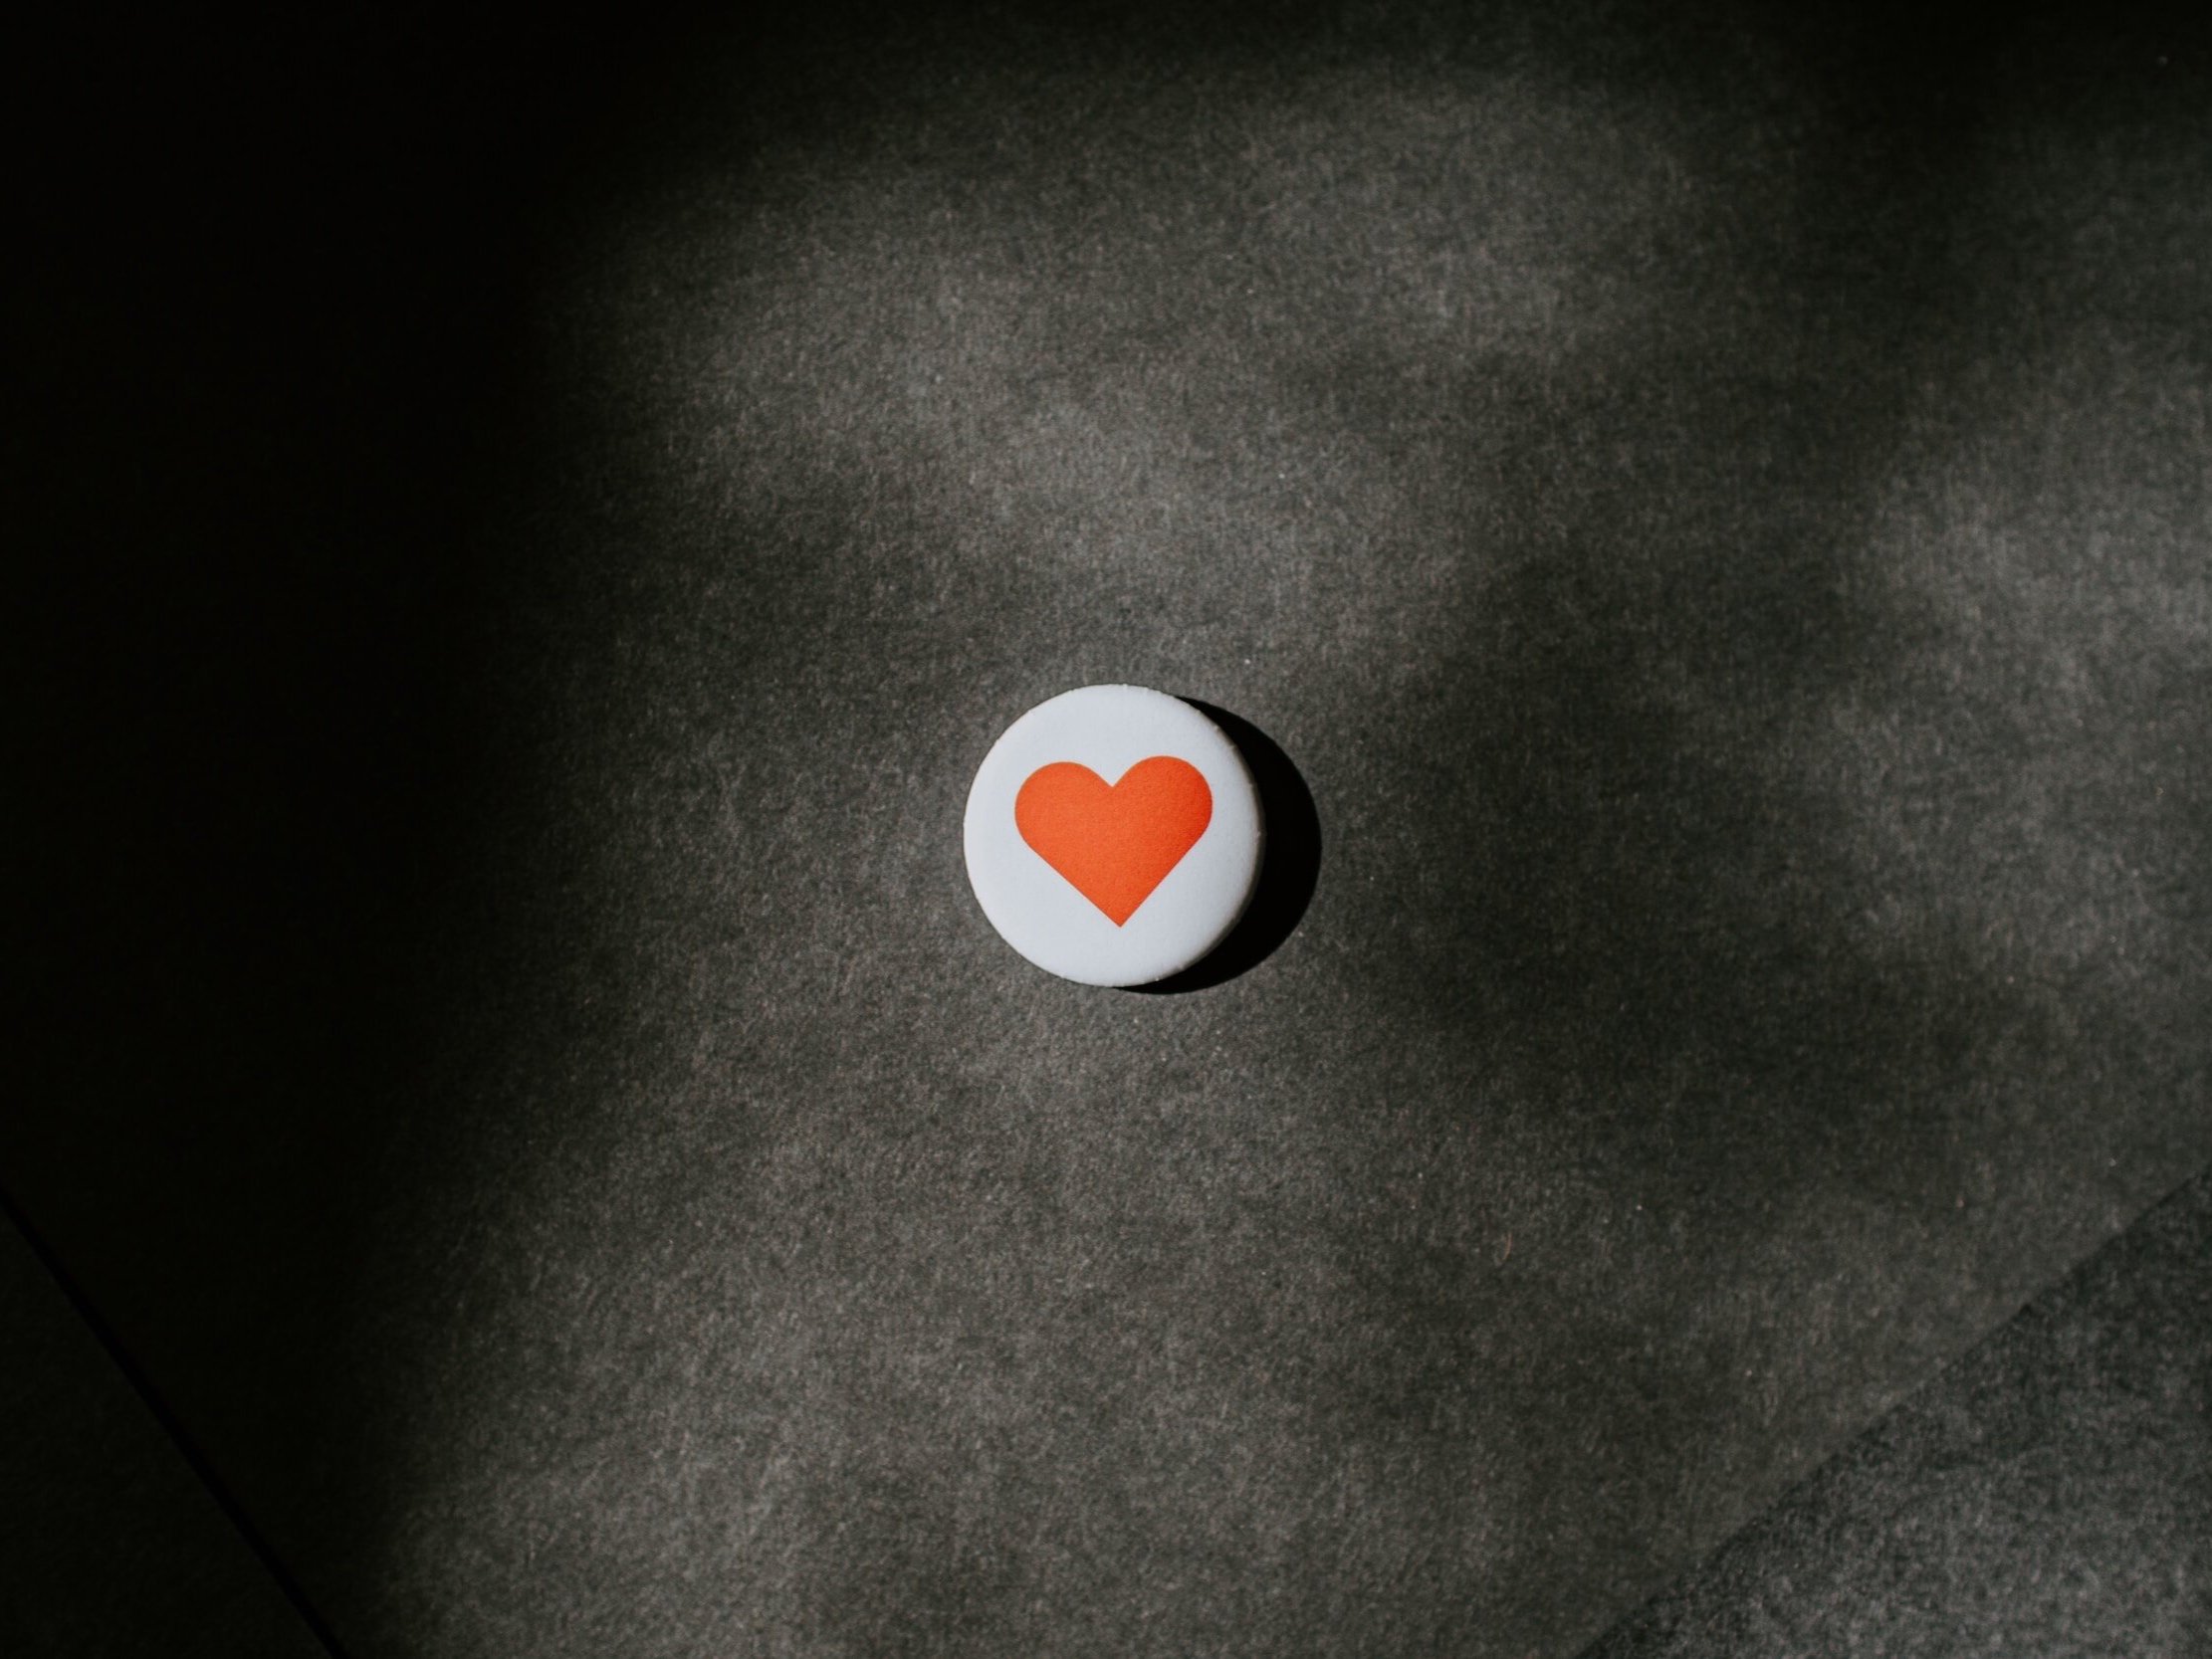 On a felt surface, a white badge with a single red love heart is displayed.